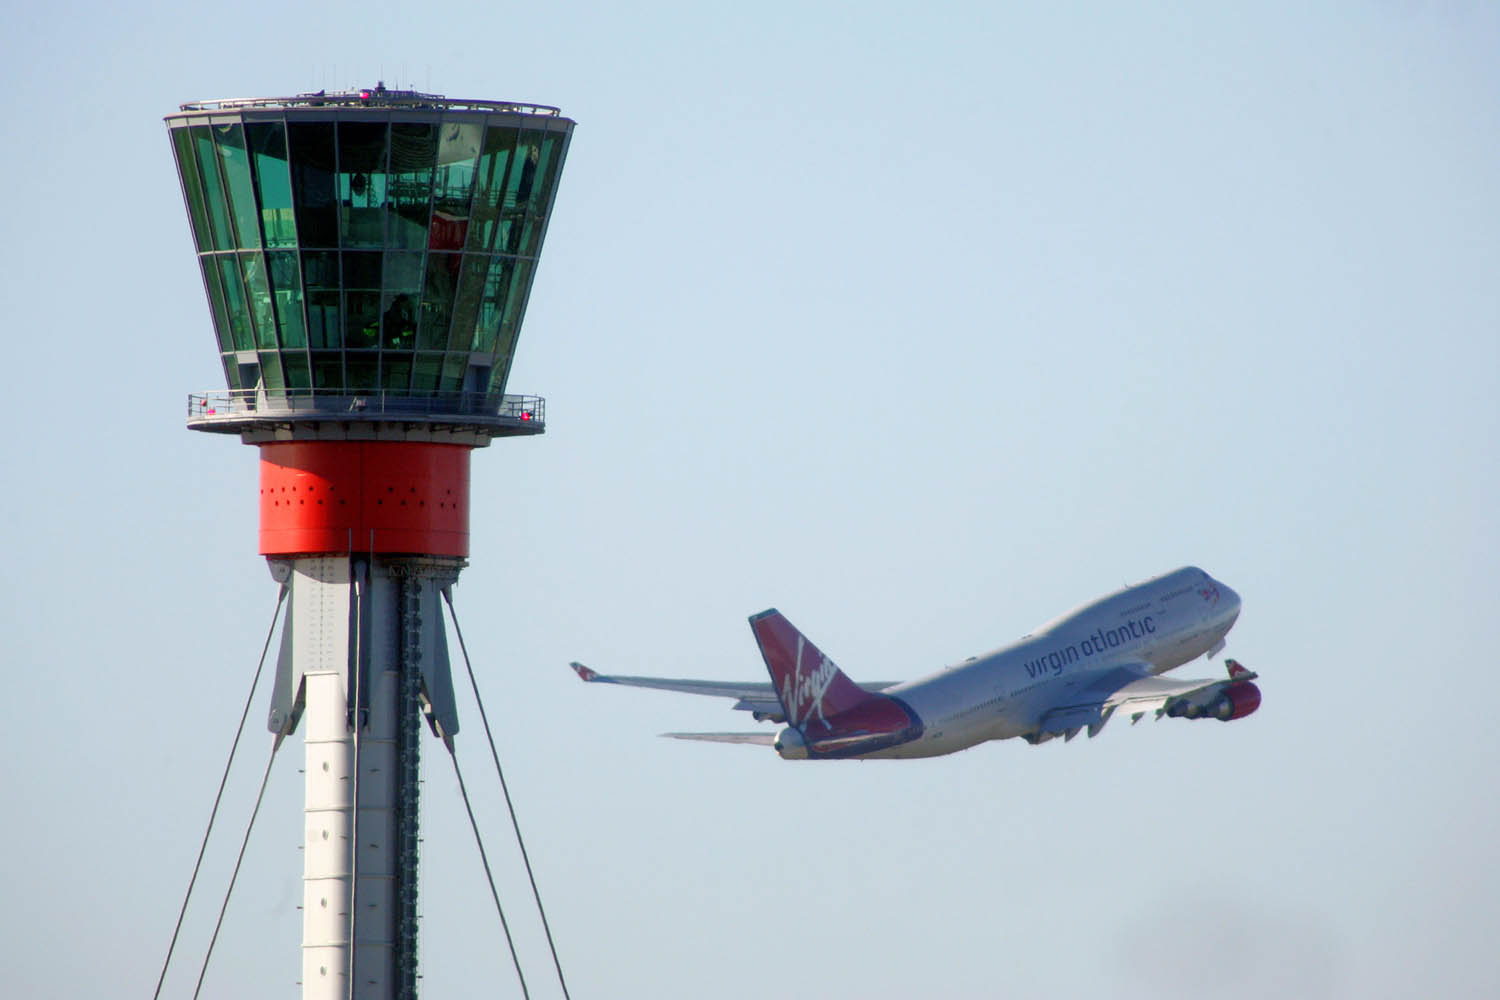 Heathrow flight path trial sparks record number of complaints